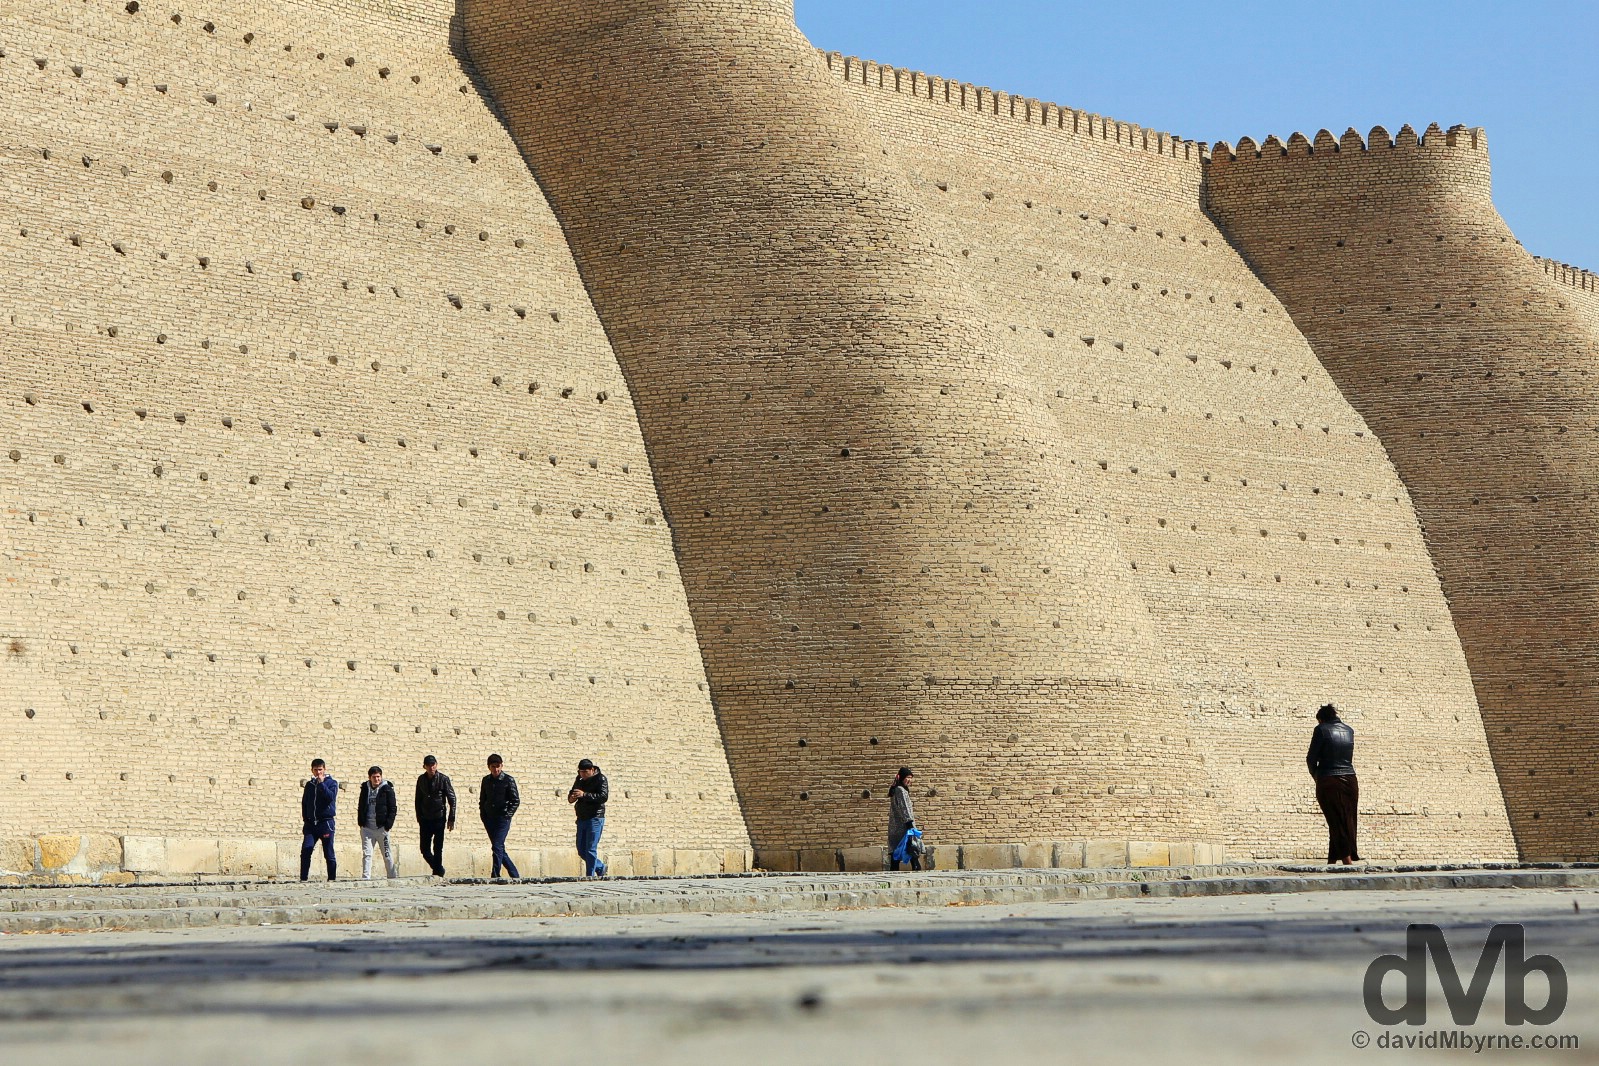 Outside the towering walls of the Ark citadel in Bukhara, Uzbekistan. March 11, 2015.